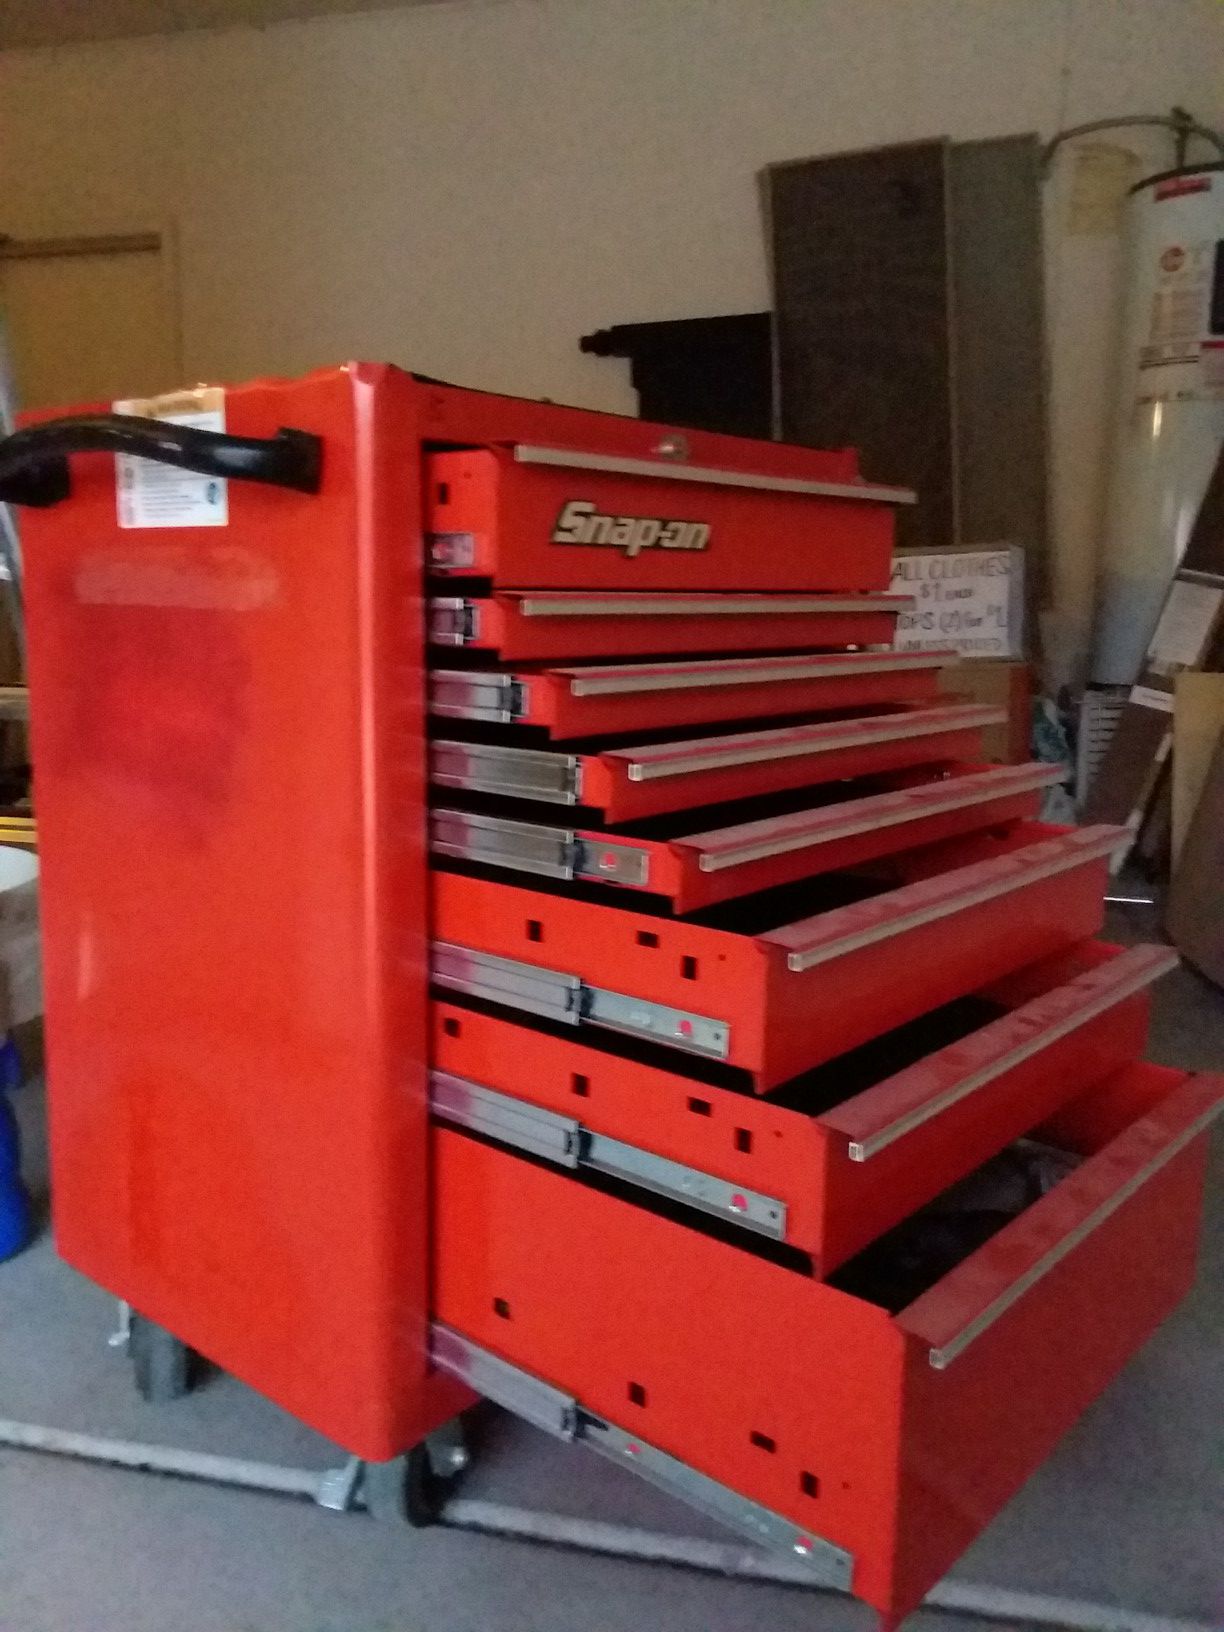 Snap on mobile tool box